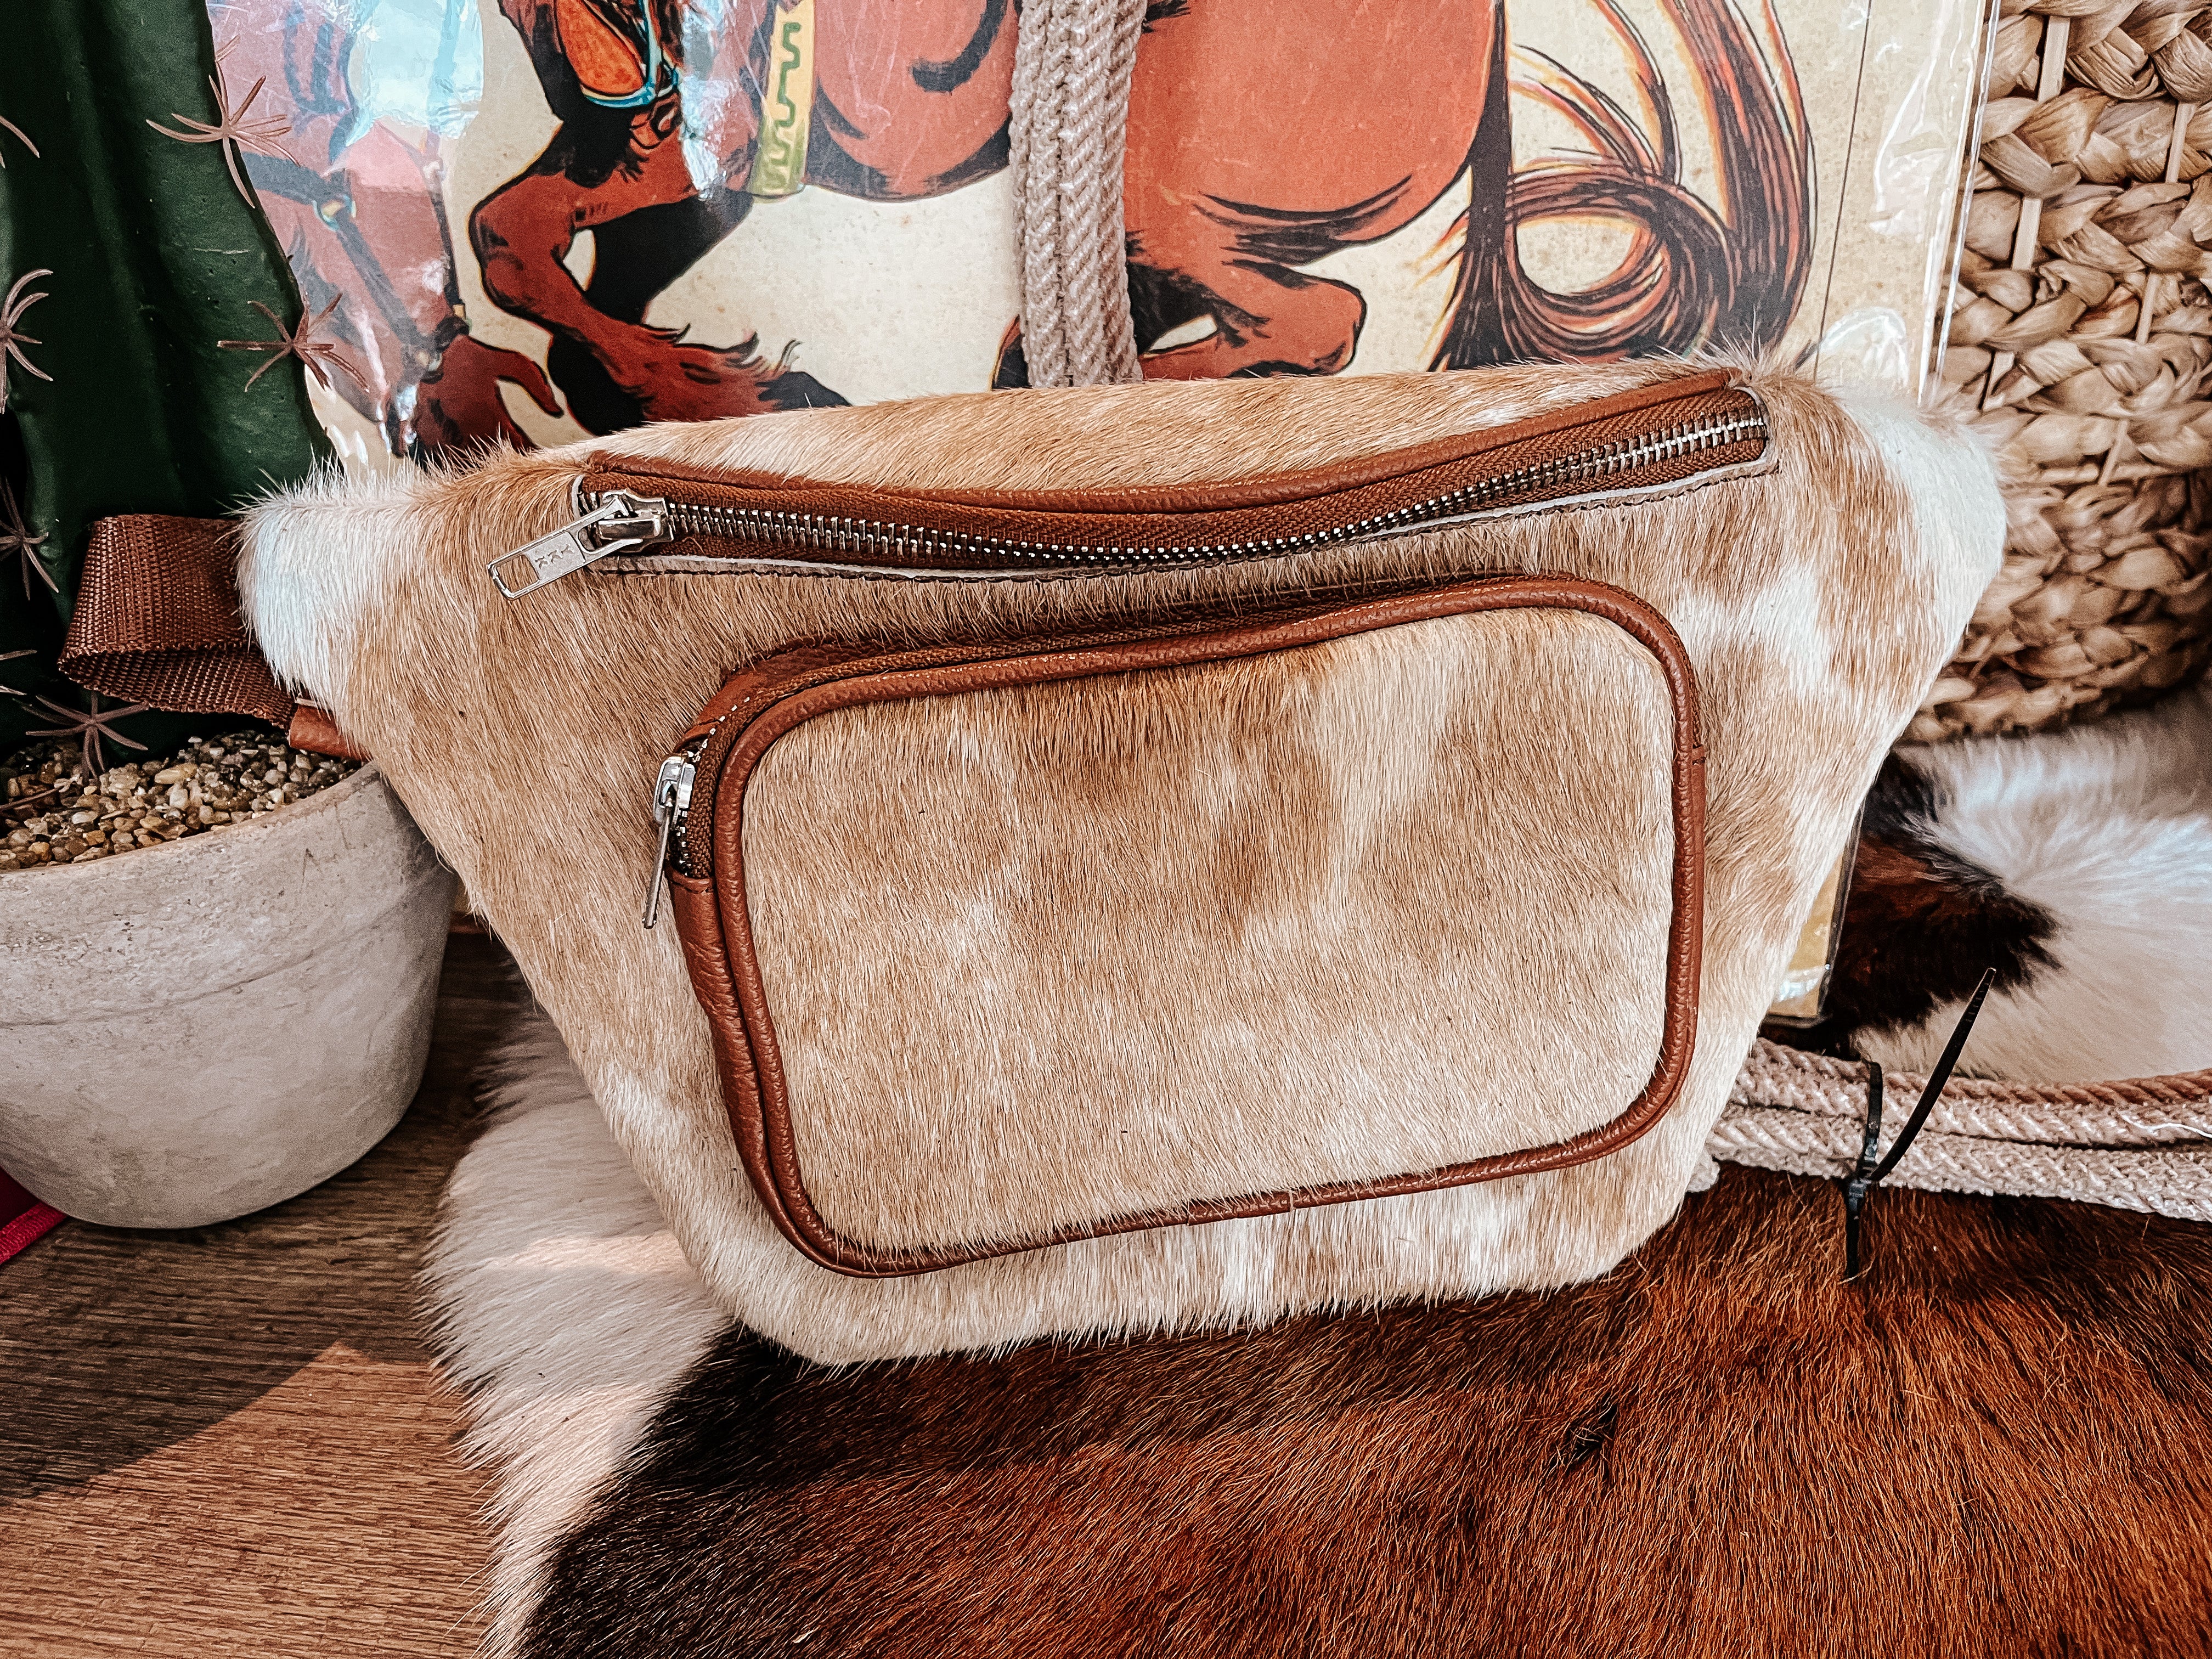 Leather Cowhide Fanny Pack – Punchy Vaquera